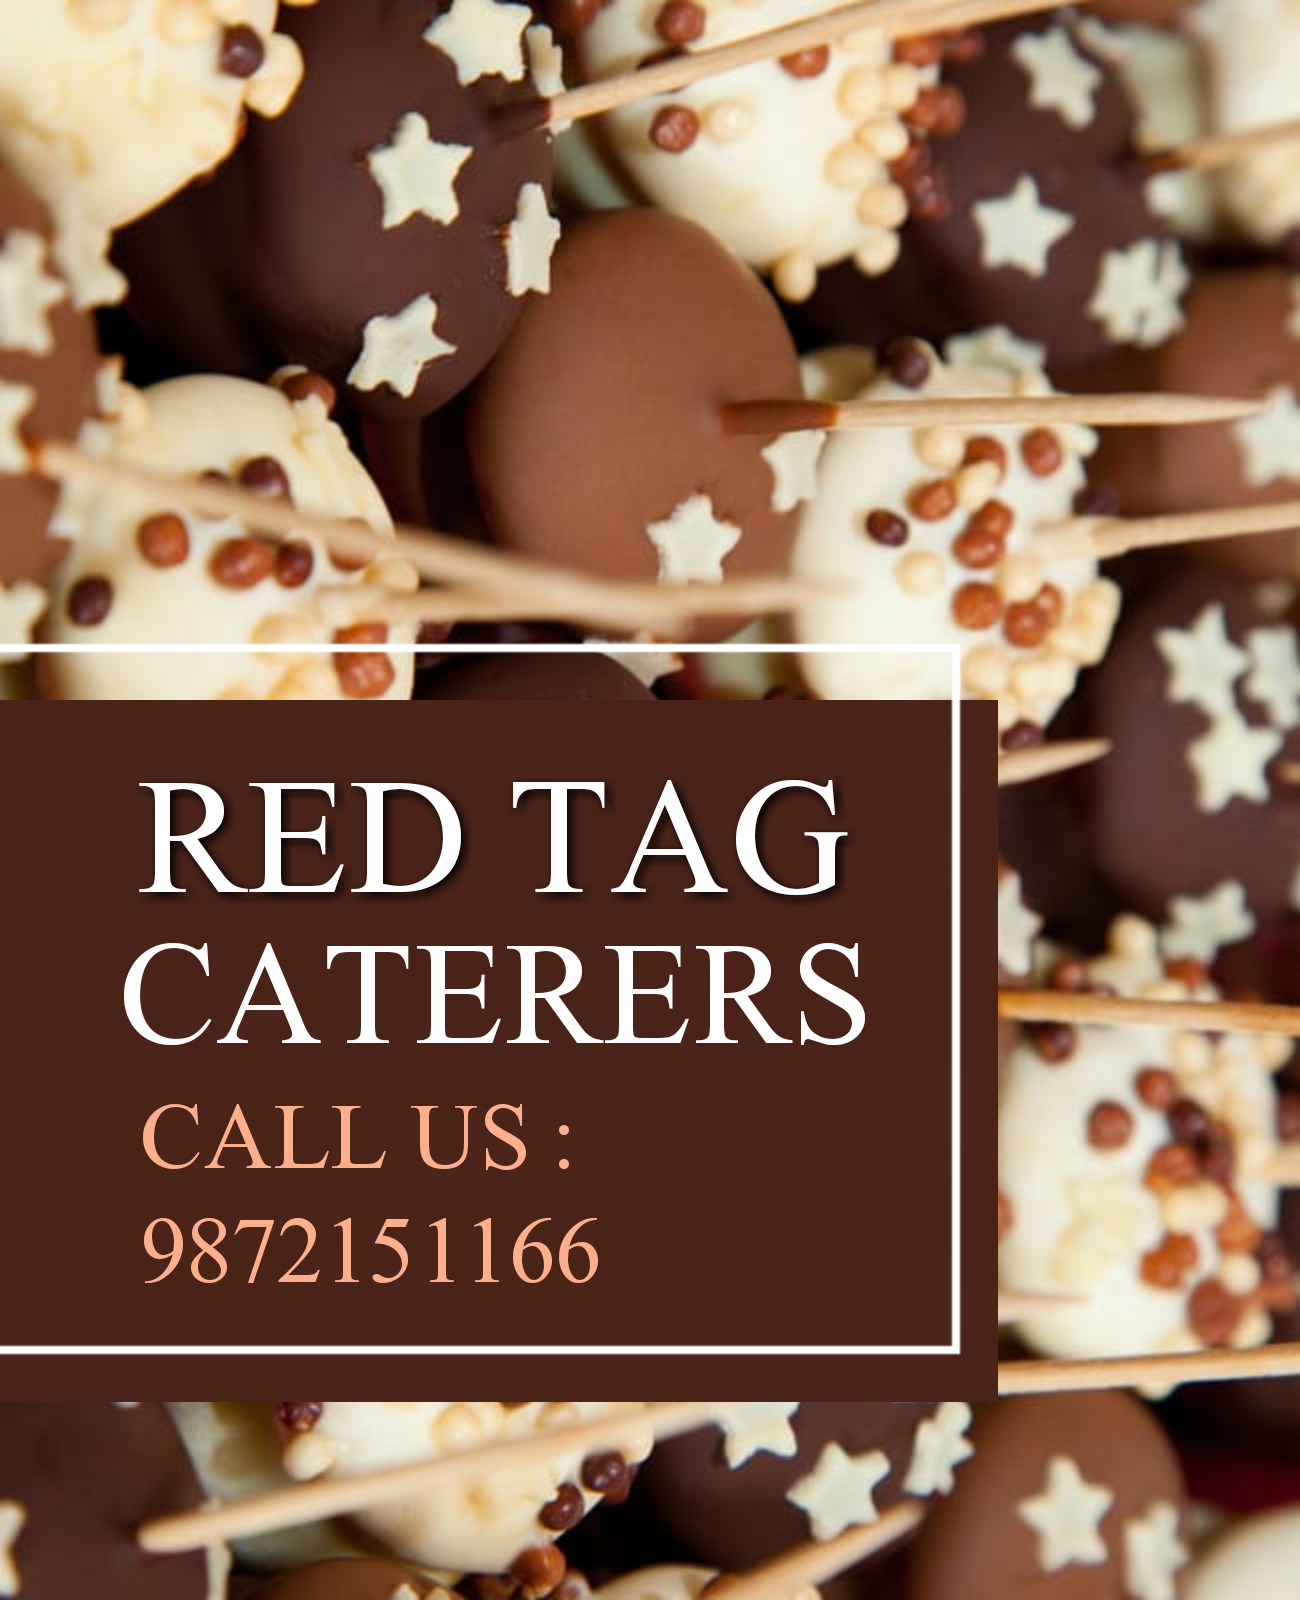 BEST CATERERS IN CHANDIGARH (U.T) | Red Tag Caterers | Best caterers in Chandigarh (u.t), best wedding caterers in Chandigarh, best party catering company in Chandigarh, best healthy and hygiene catering company in Chandigarh,  - GL44659